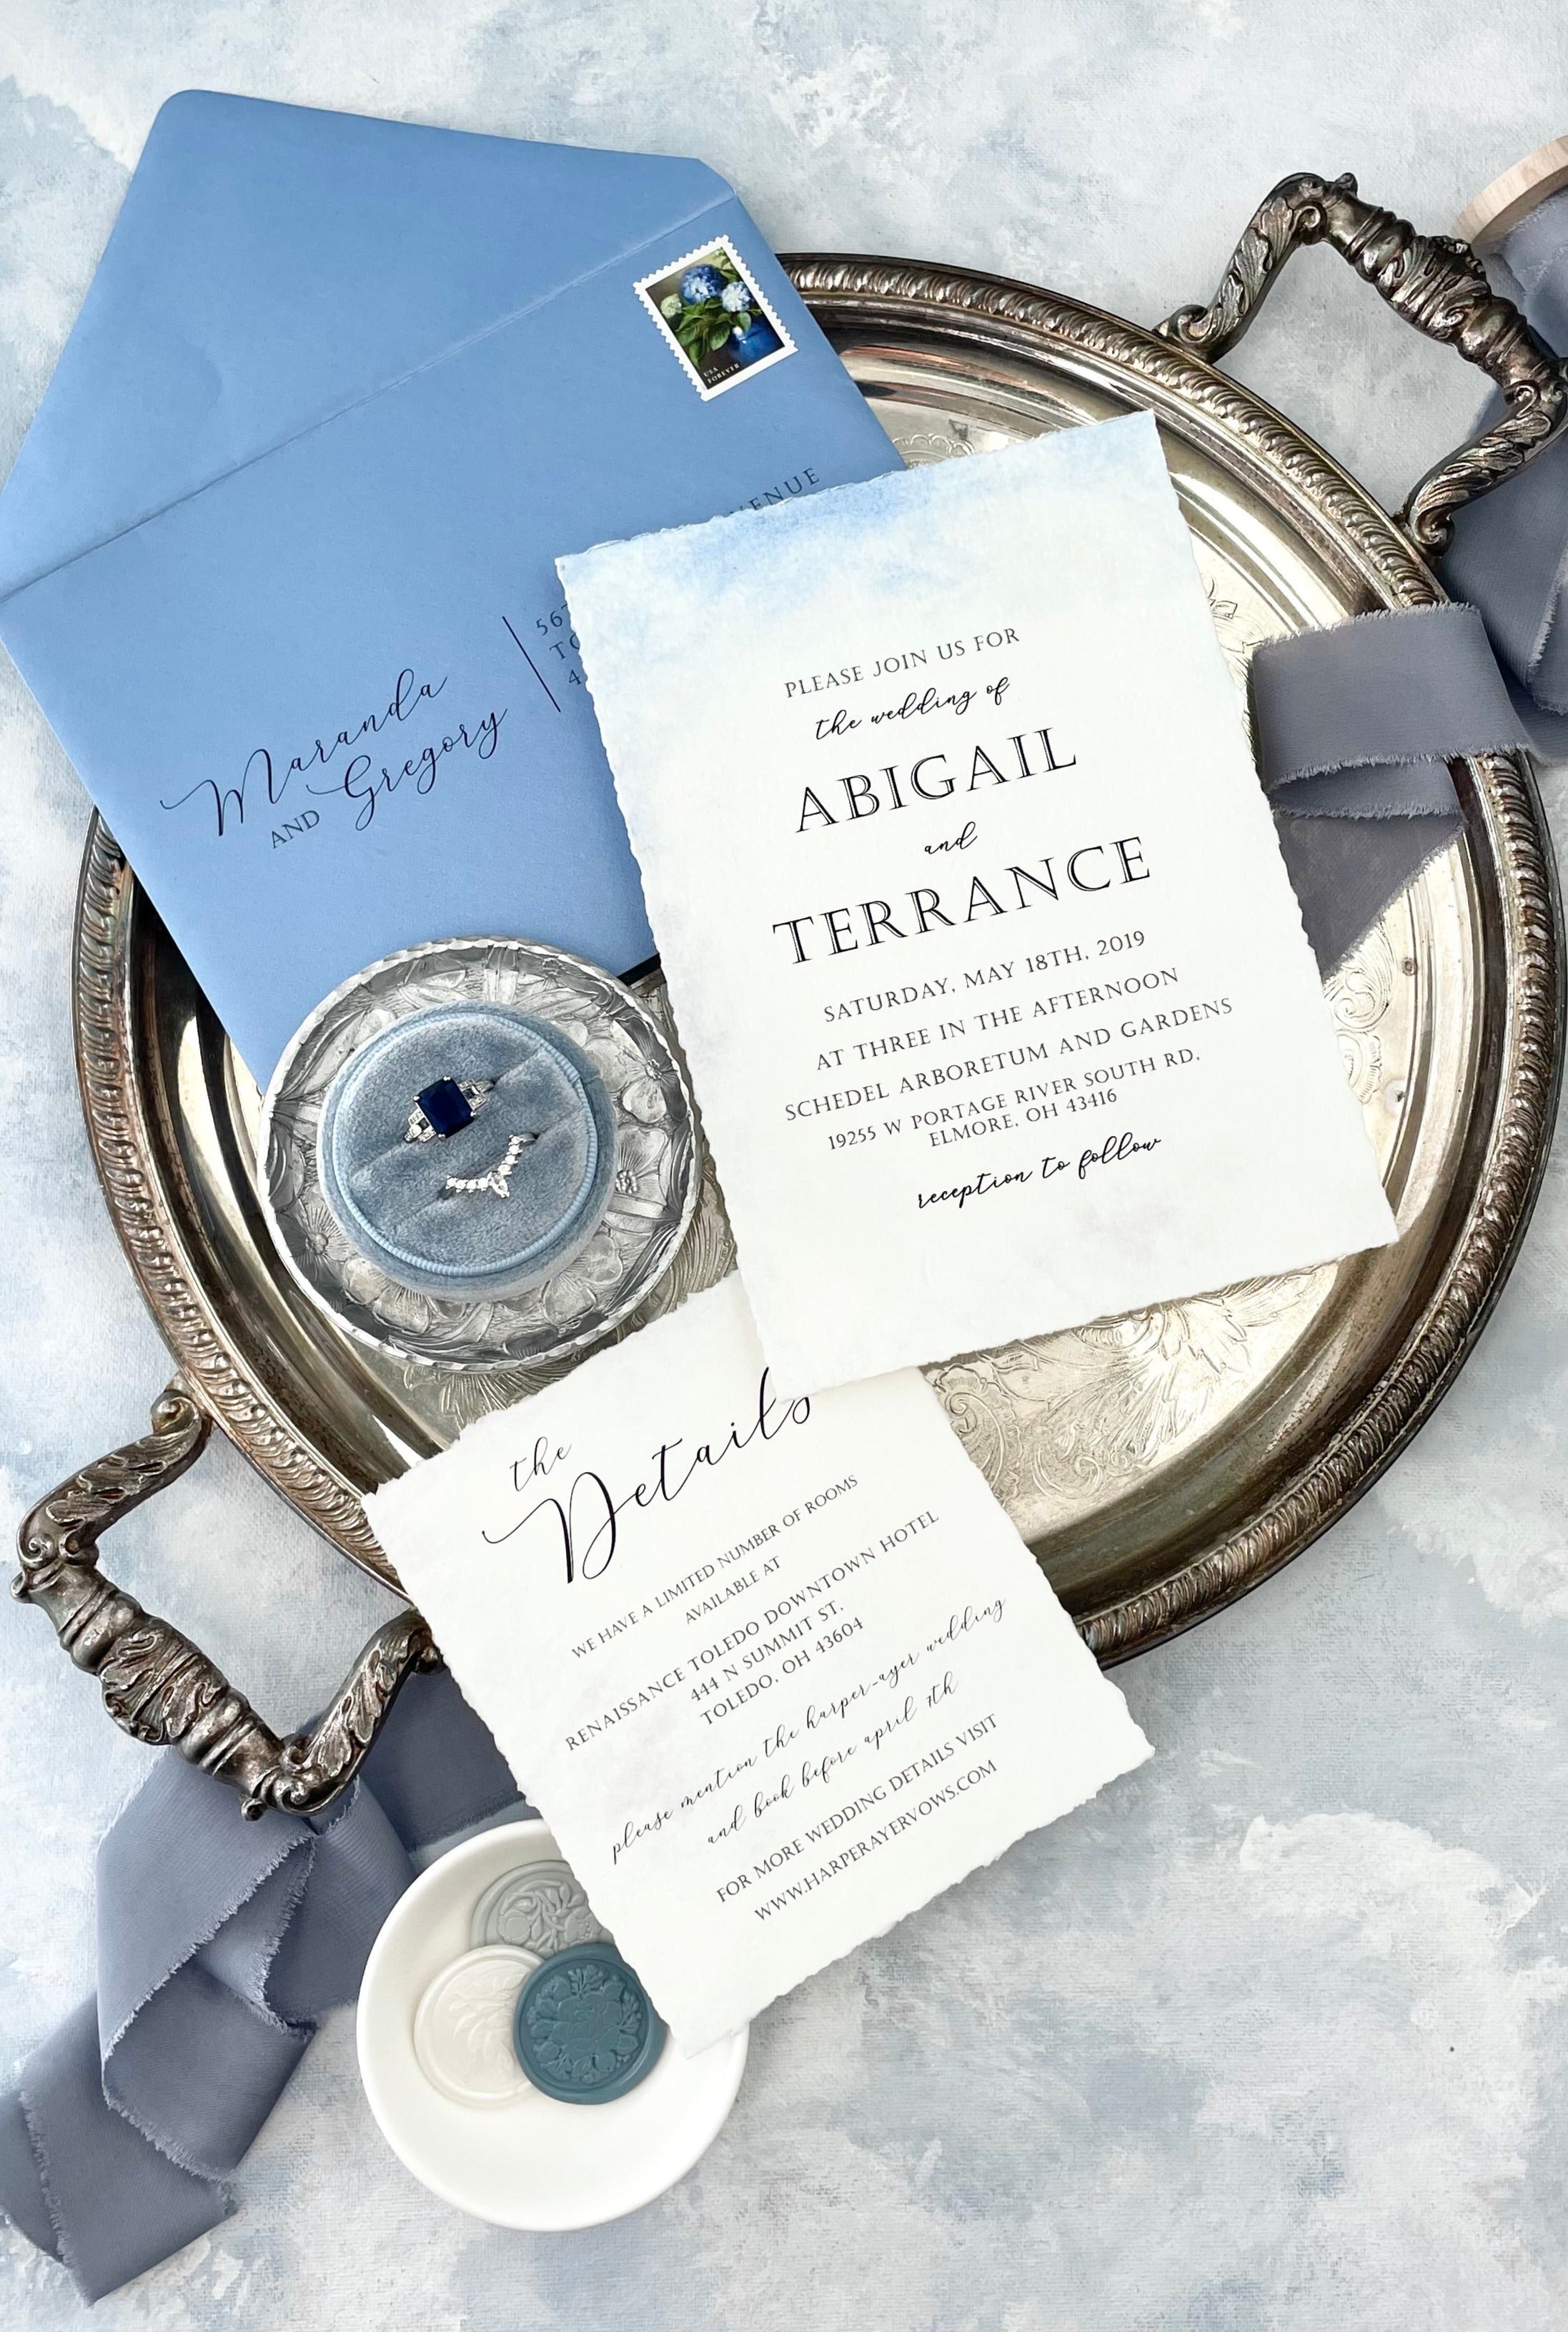 Dusty Blue Ribbon, styled with dusty blue flat lay styling kit, white wedding invitation with blue envelope and dusty blue ring box on silver tray - wedding flat lay props from Champagne & GRIT